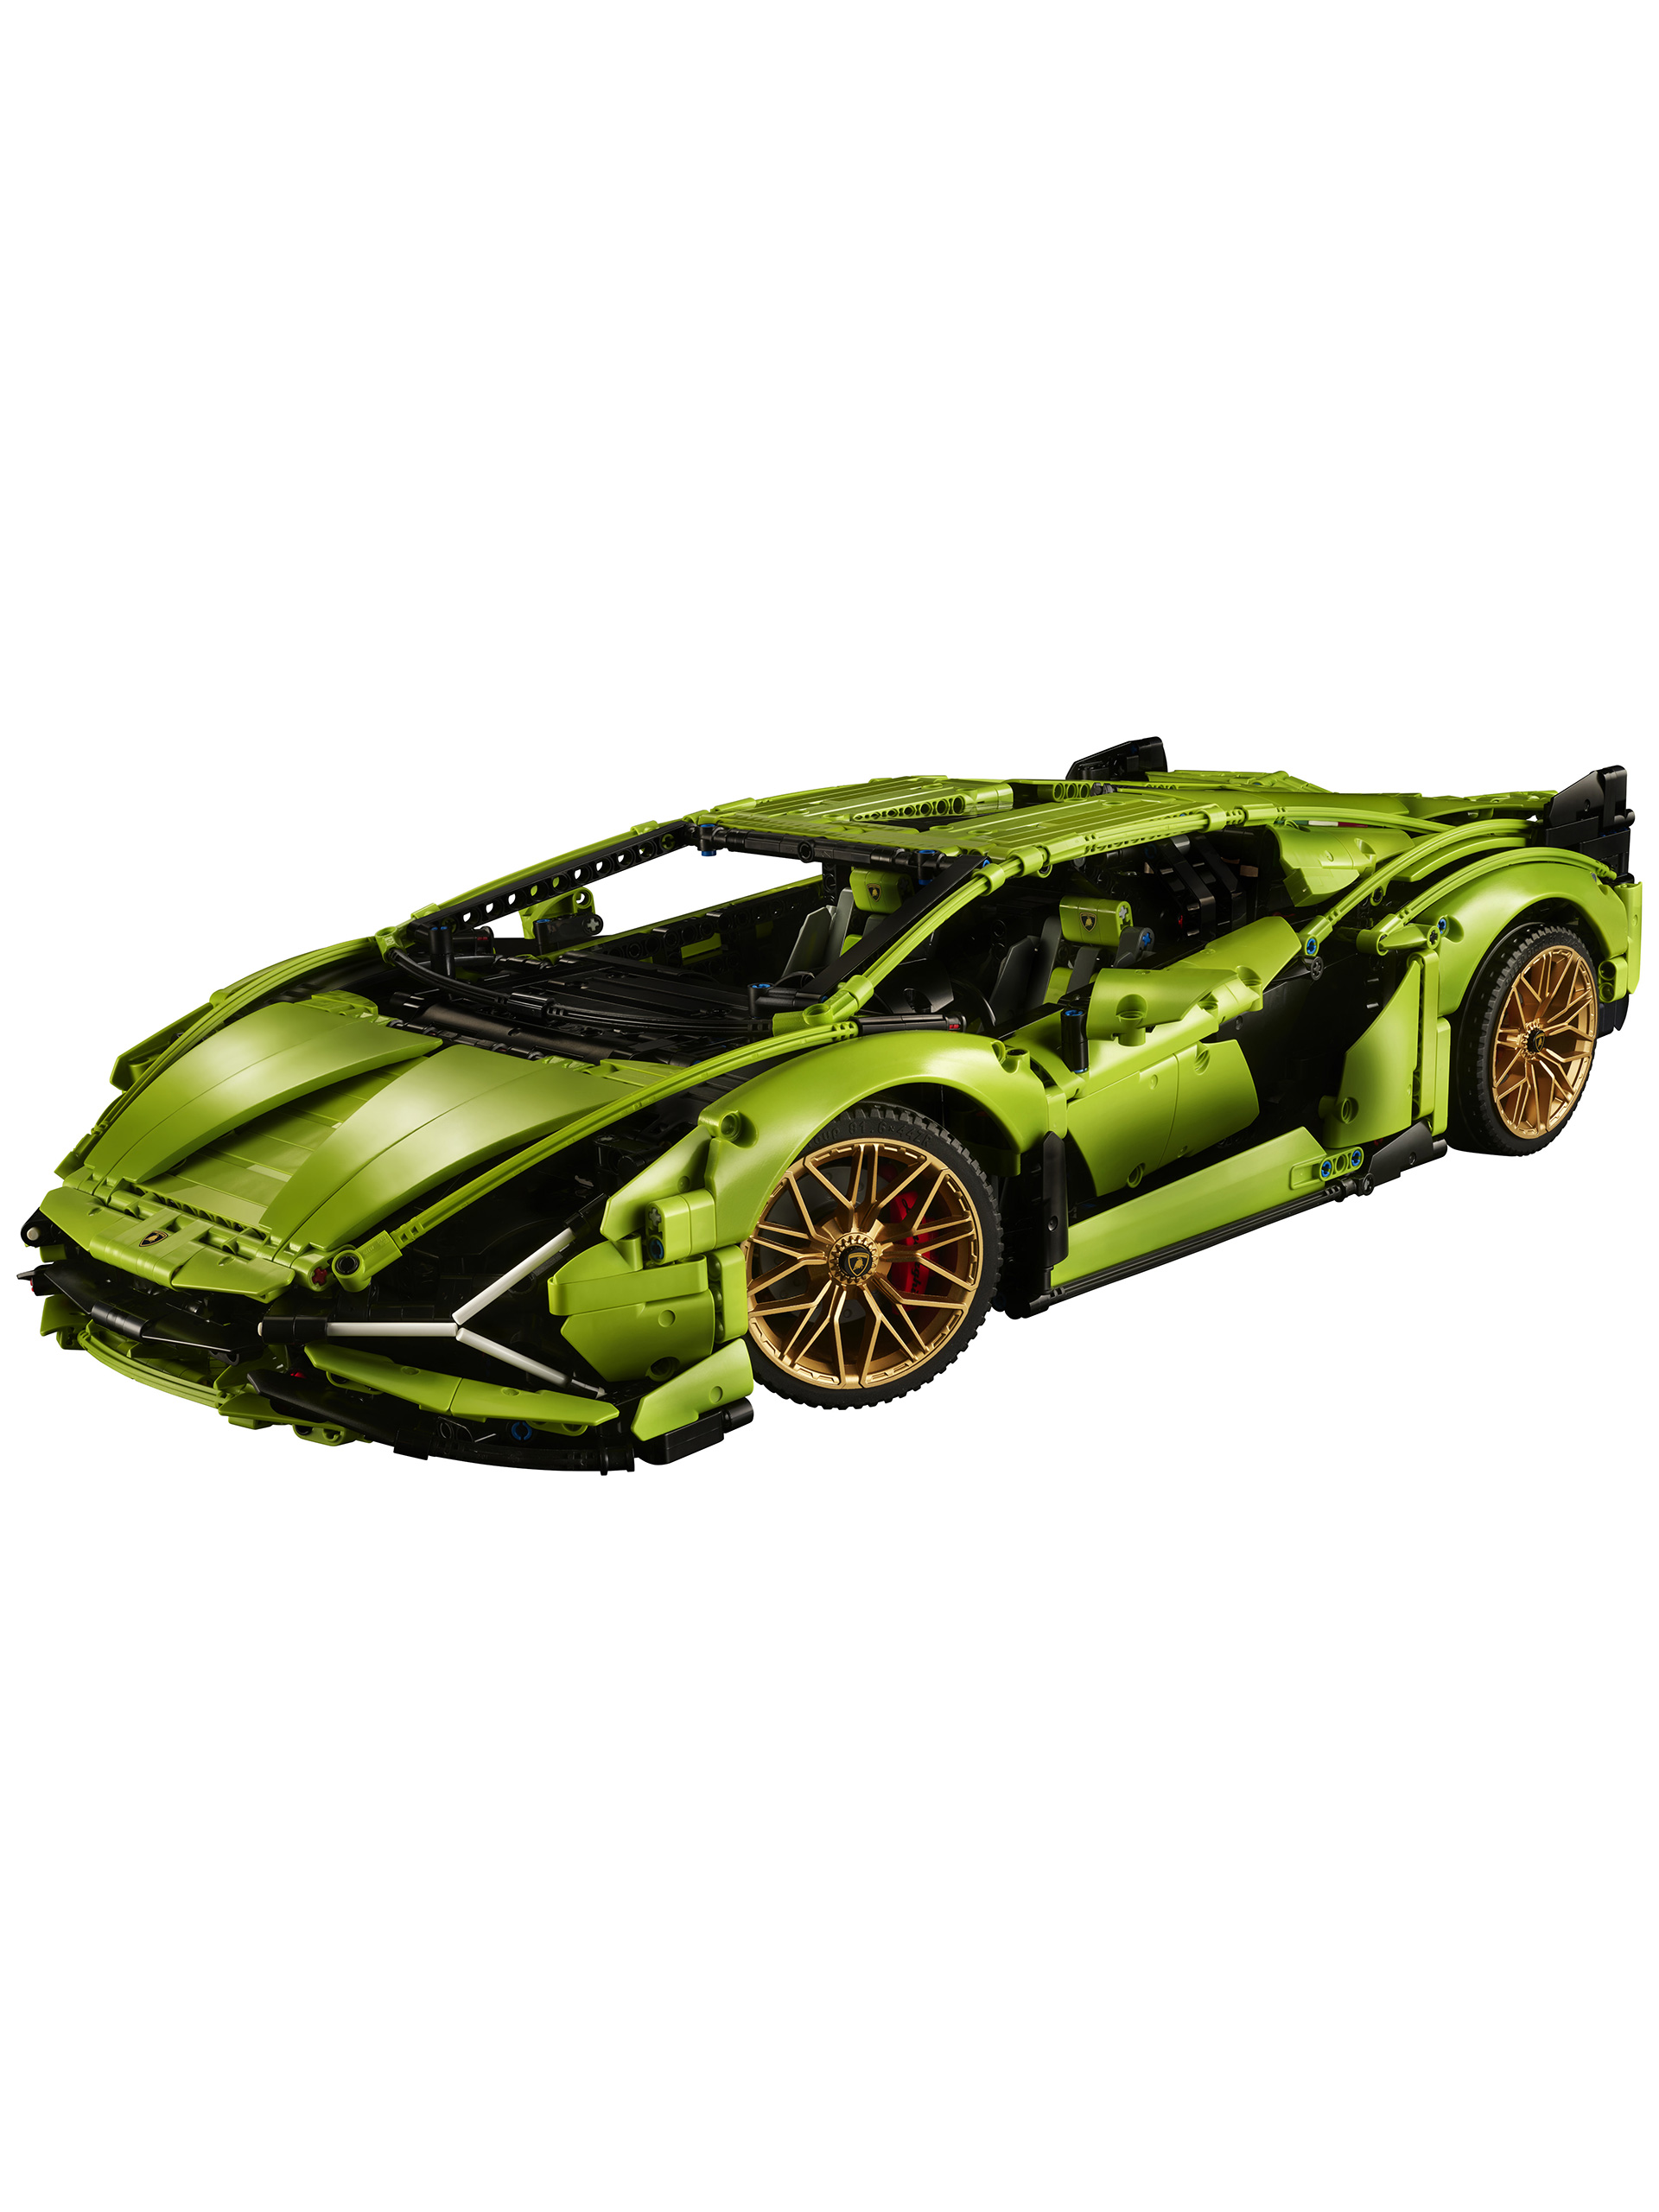 The LEGO Technic Lamborghini Sián FKP 37  A Super Sports Car that is built  piece by piece from dreams. We brought it to life with LEGO Technic in the  form of